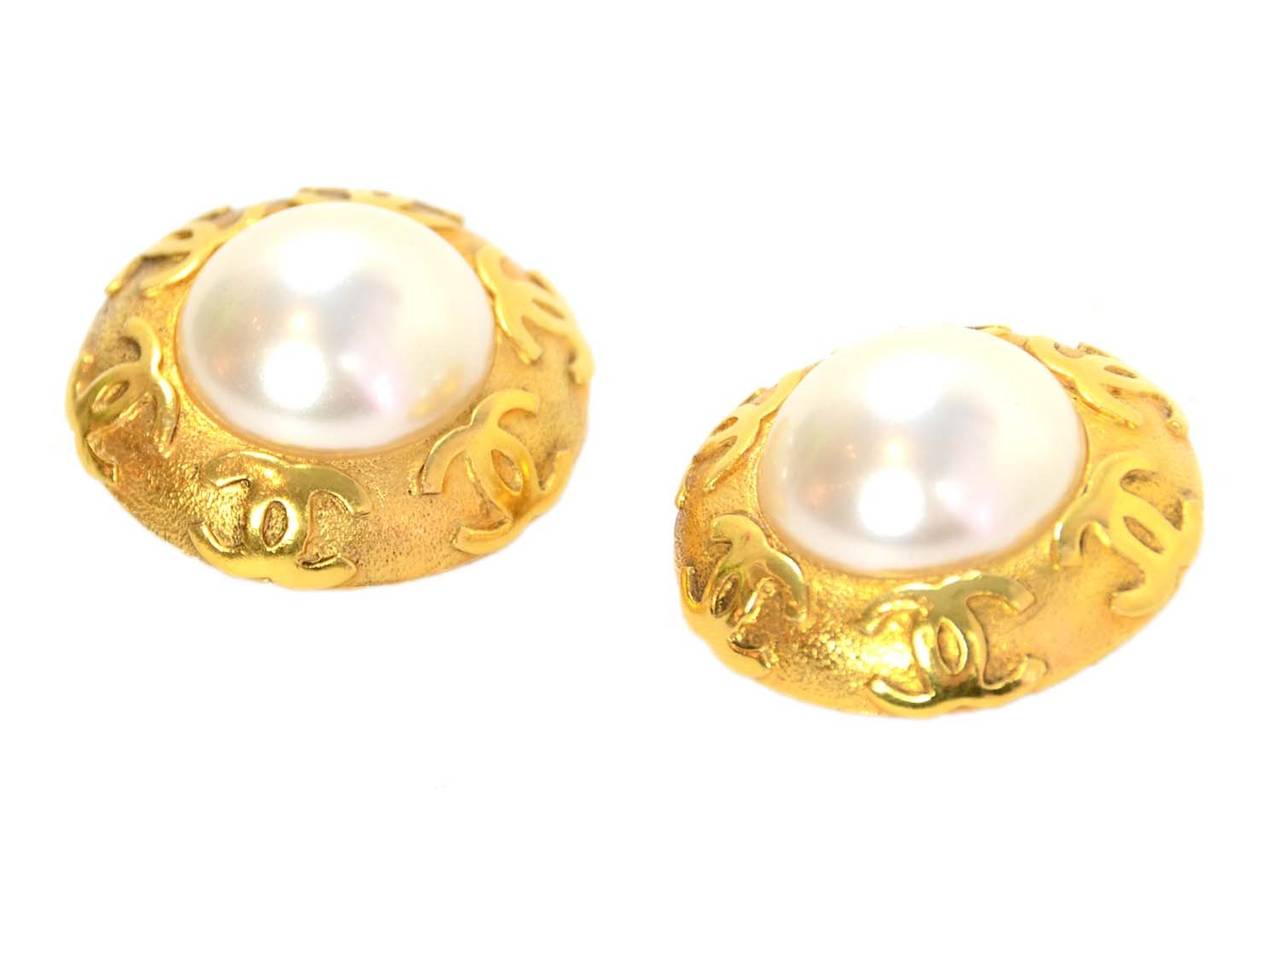 Chanel Vintage 1989 Goldtone and Faux Pearl Clip-on Earrings
Features goldtone CC's surrounding pendant

    Made in: France
    Year of Production: 1989
    Stamp: CHANEL 29 MADE IN FRANCE
    Closure: Clip-on
    Color: Goldtone
   